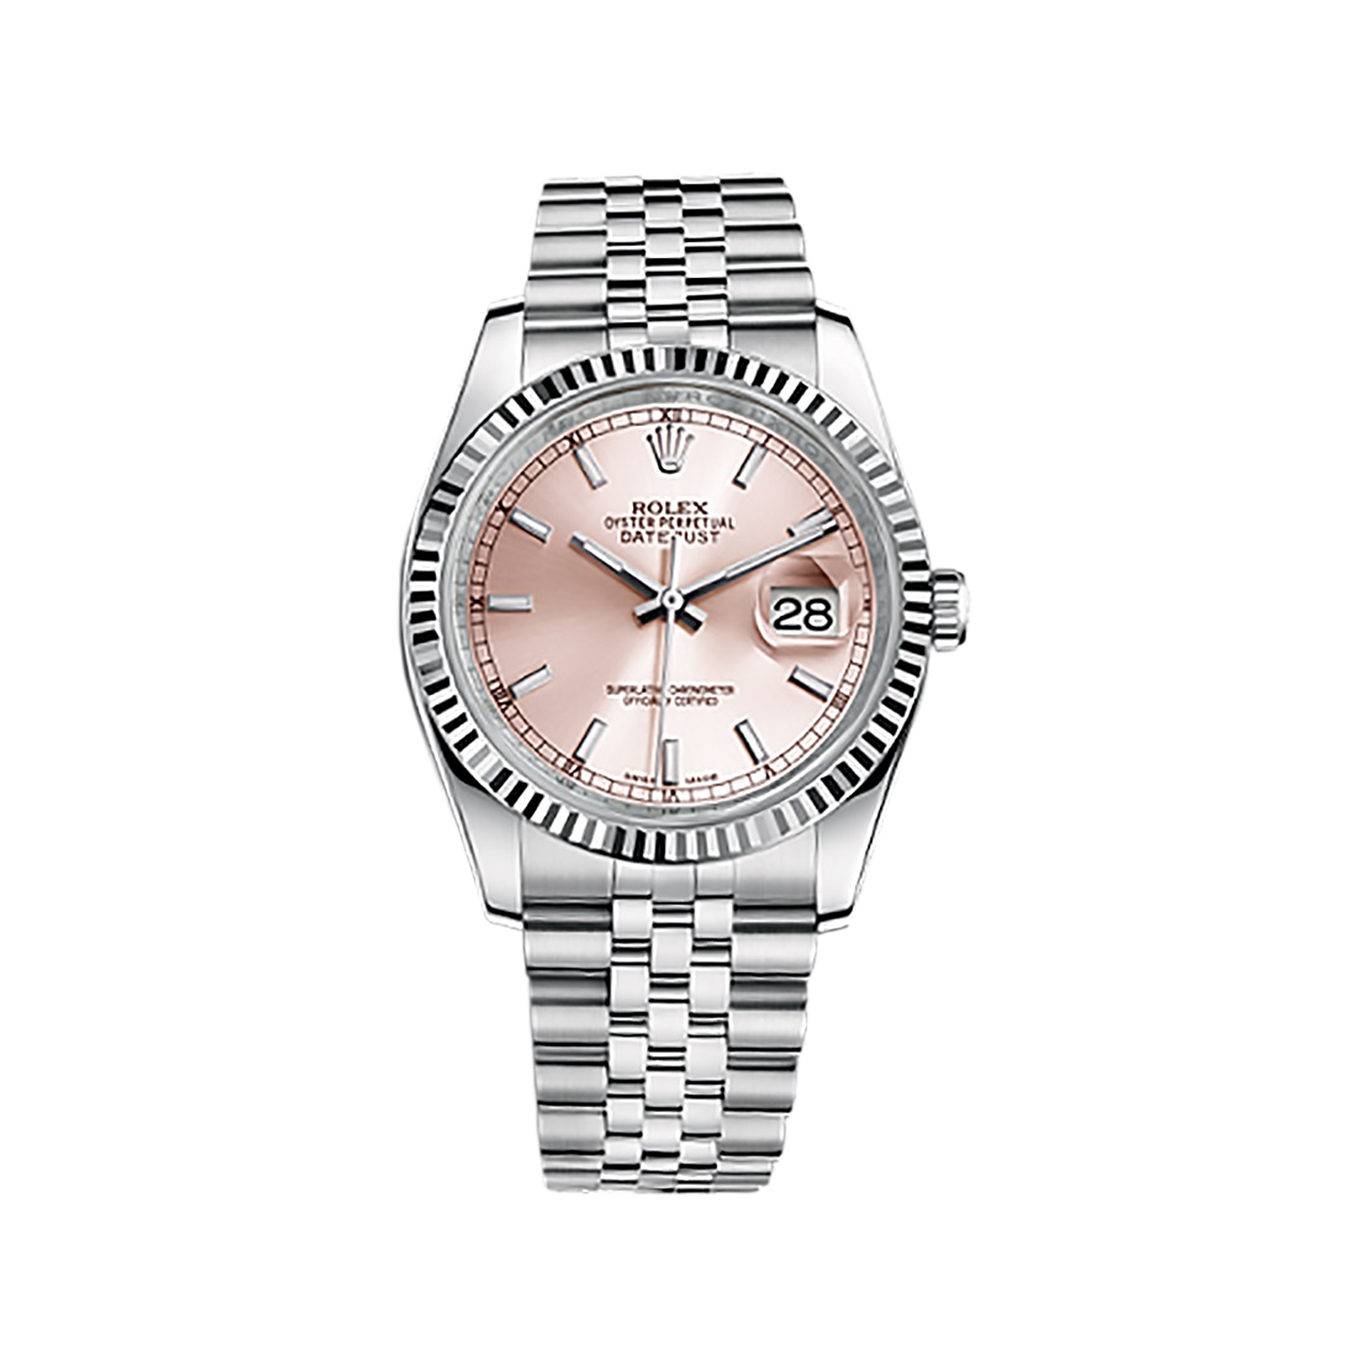 Datejust 36 116234 White Gold & Stainless Steel Watch (Pink)